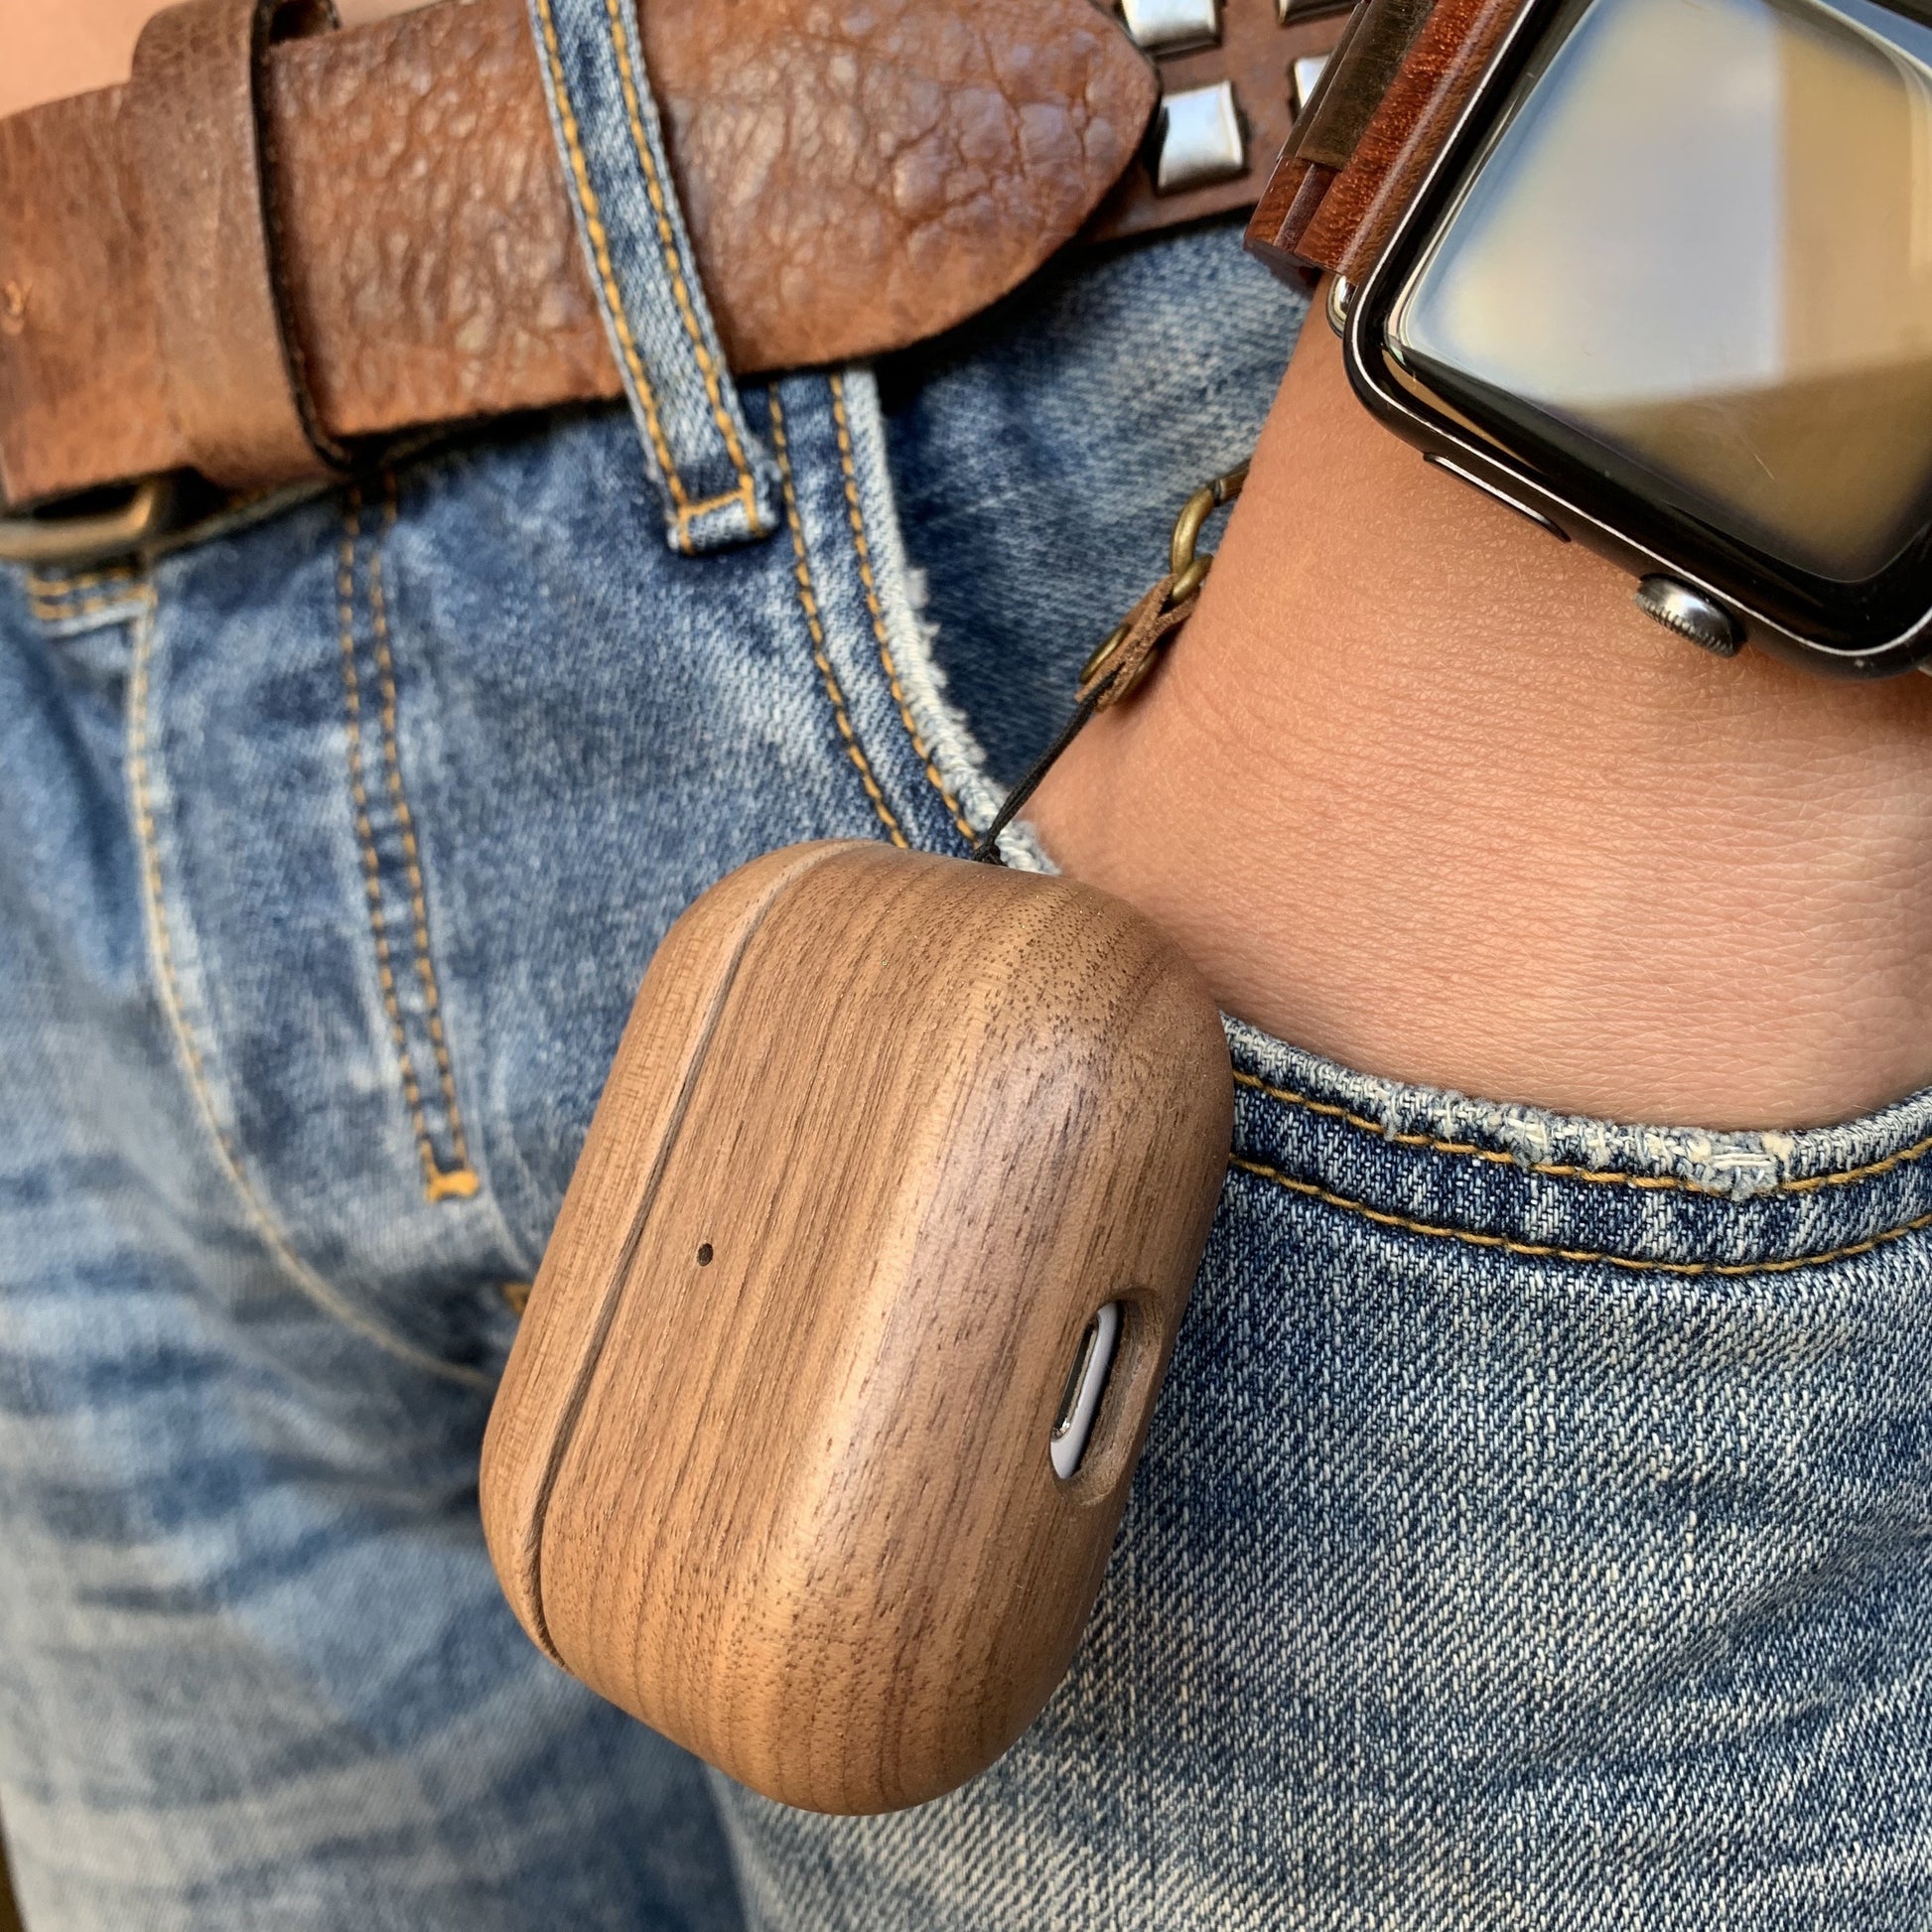 Slim Wooden Case for AirPods Pro 🌳 Natural Wood. ♻️ Eco-friendly. ✈️ Free Worldwide Shipping. 🎁 Perfect Gift.